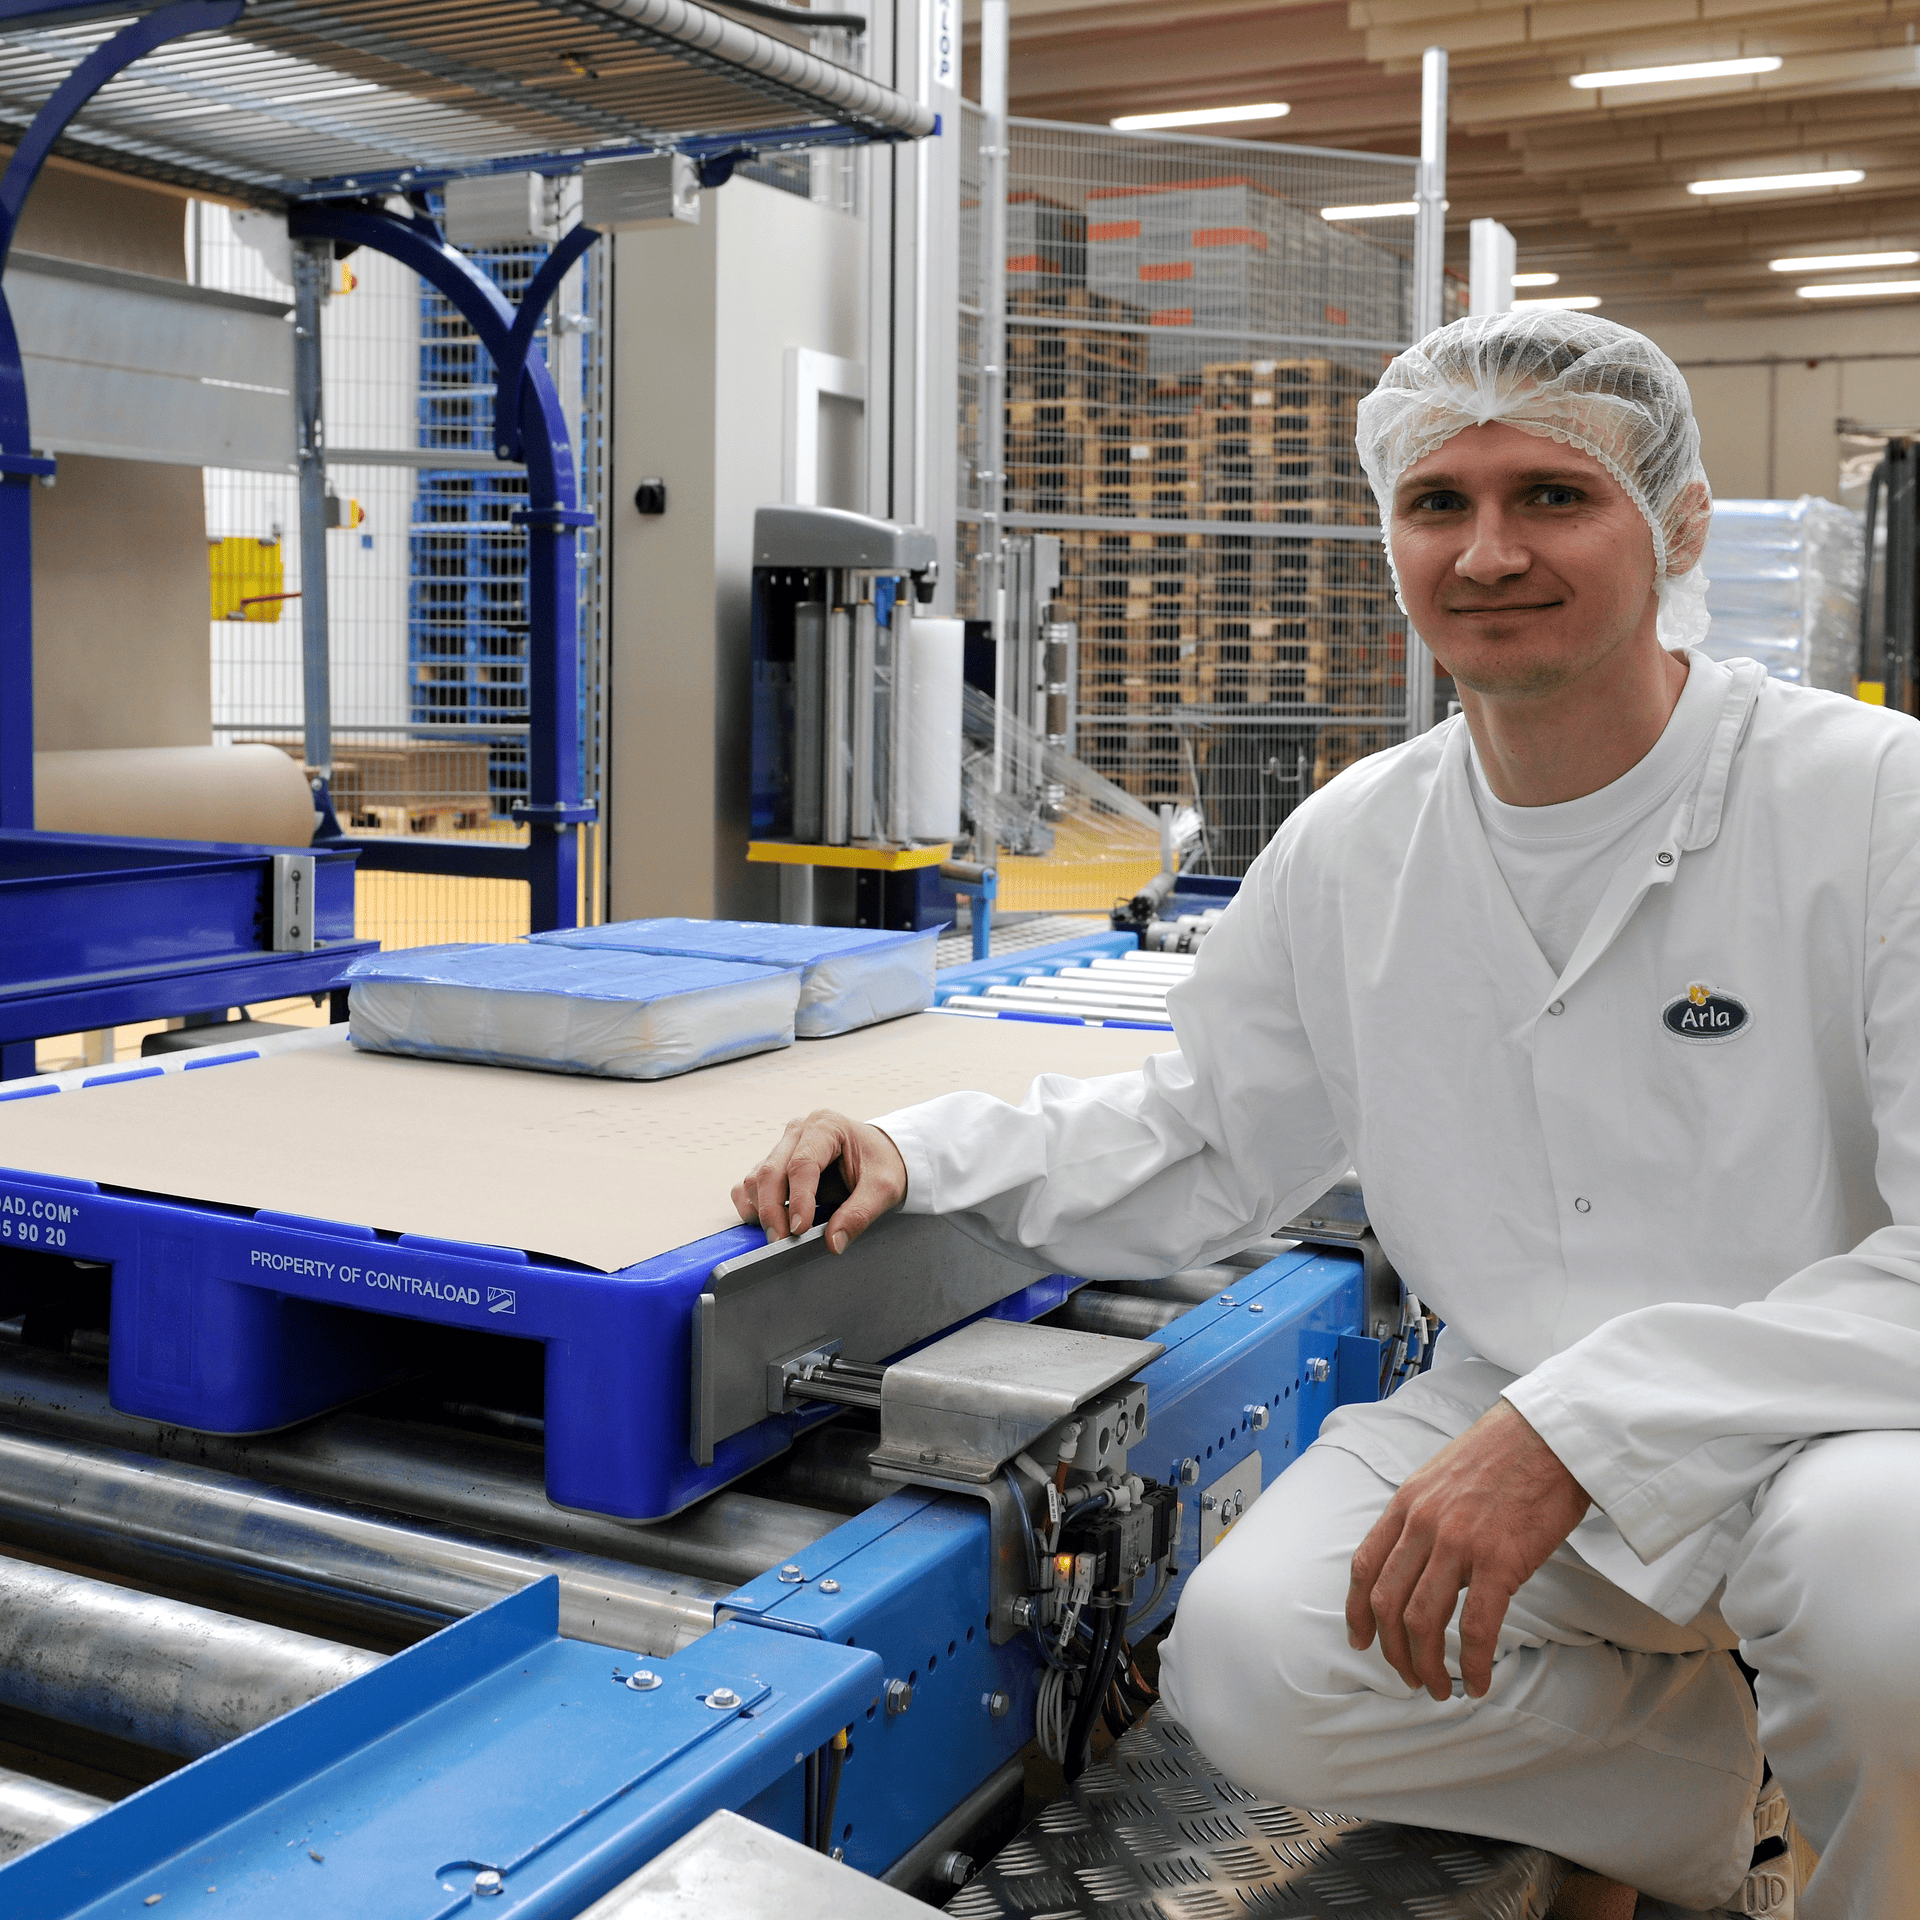 Arla uses base sheets in their palletising